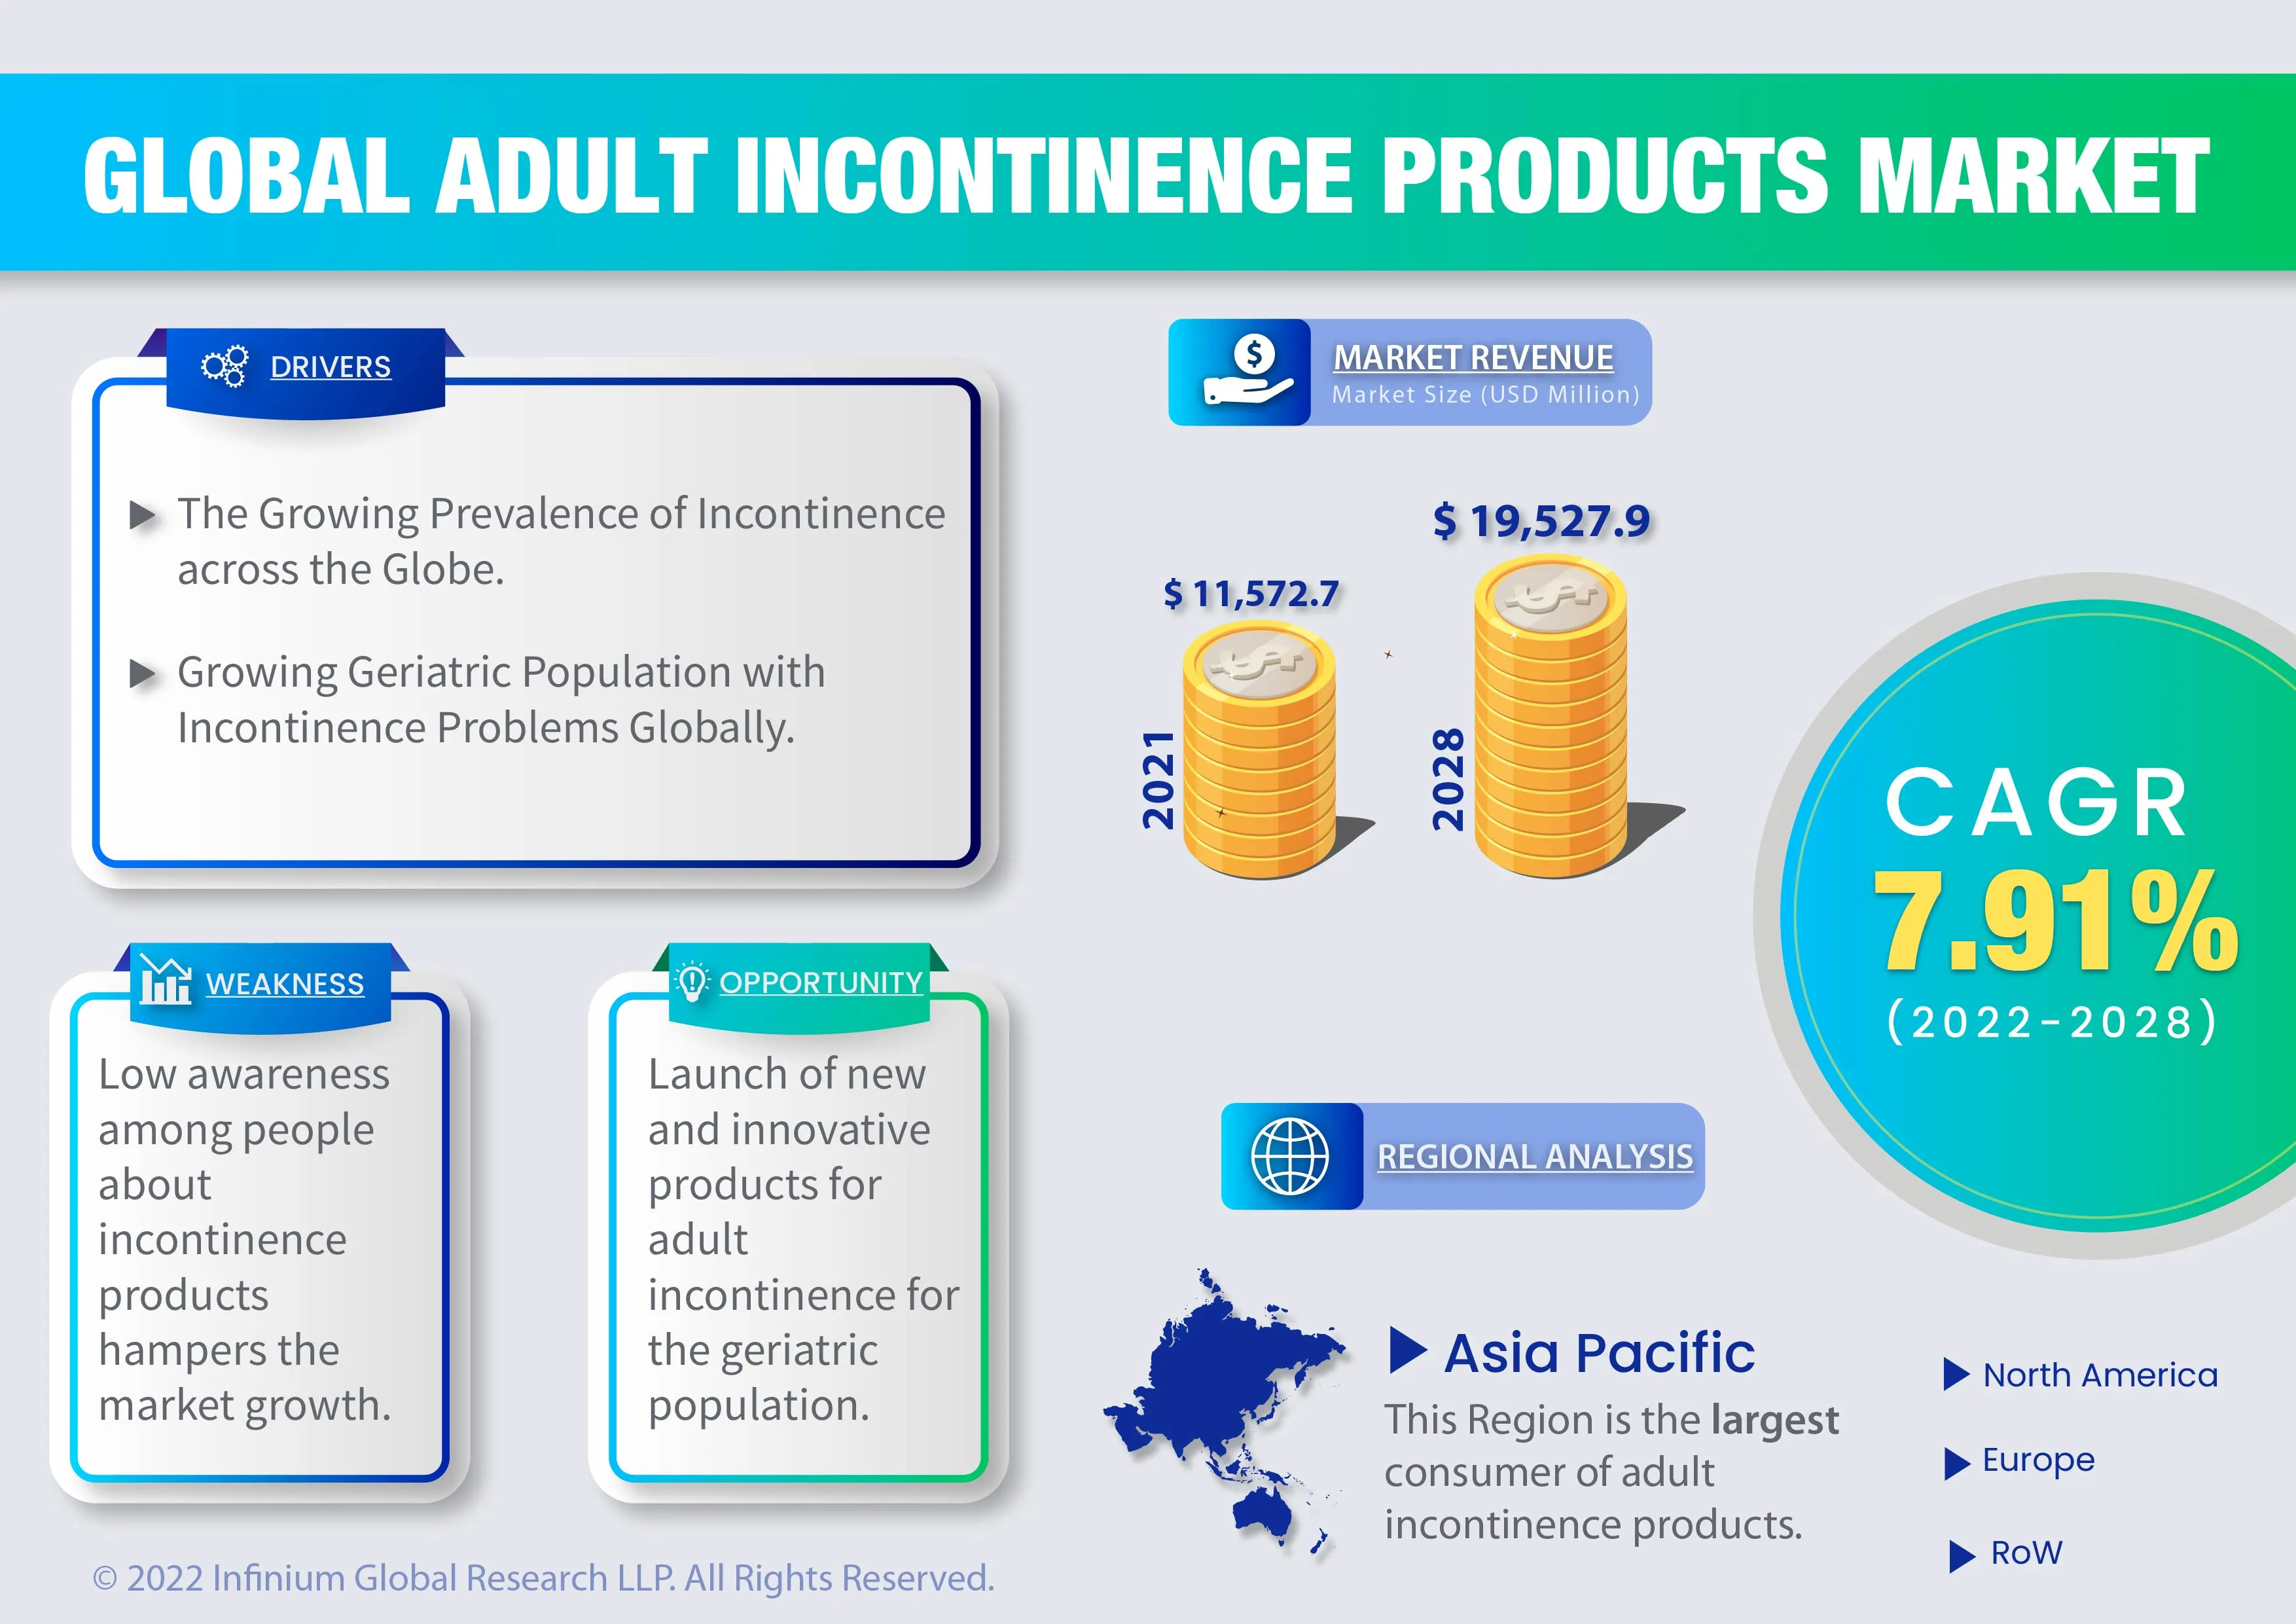 Global Adult Incontinence Products Market was Valued at Around USD 12,369.4 Million in 2022 and is Expected to Reach Nearly USD 19,527.9 Million in 2028, with a CAGR of 7.9% During the Forecast Period.